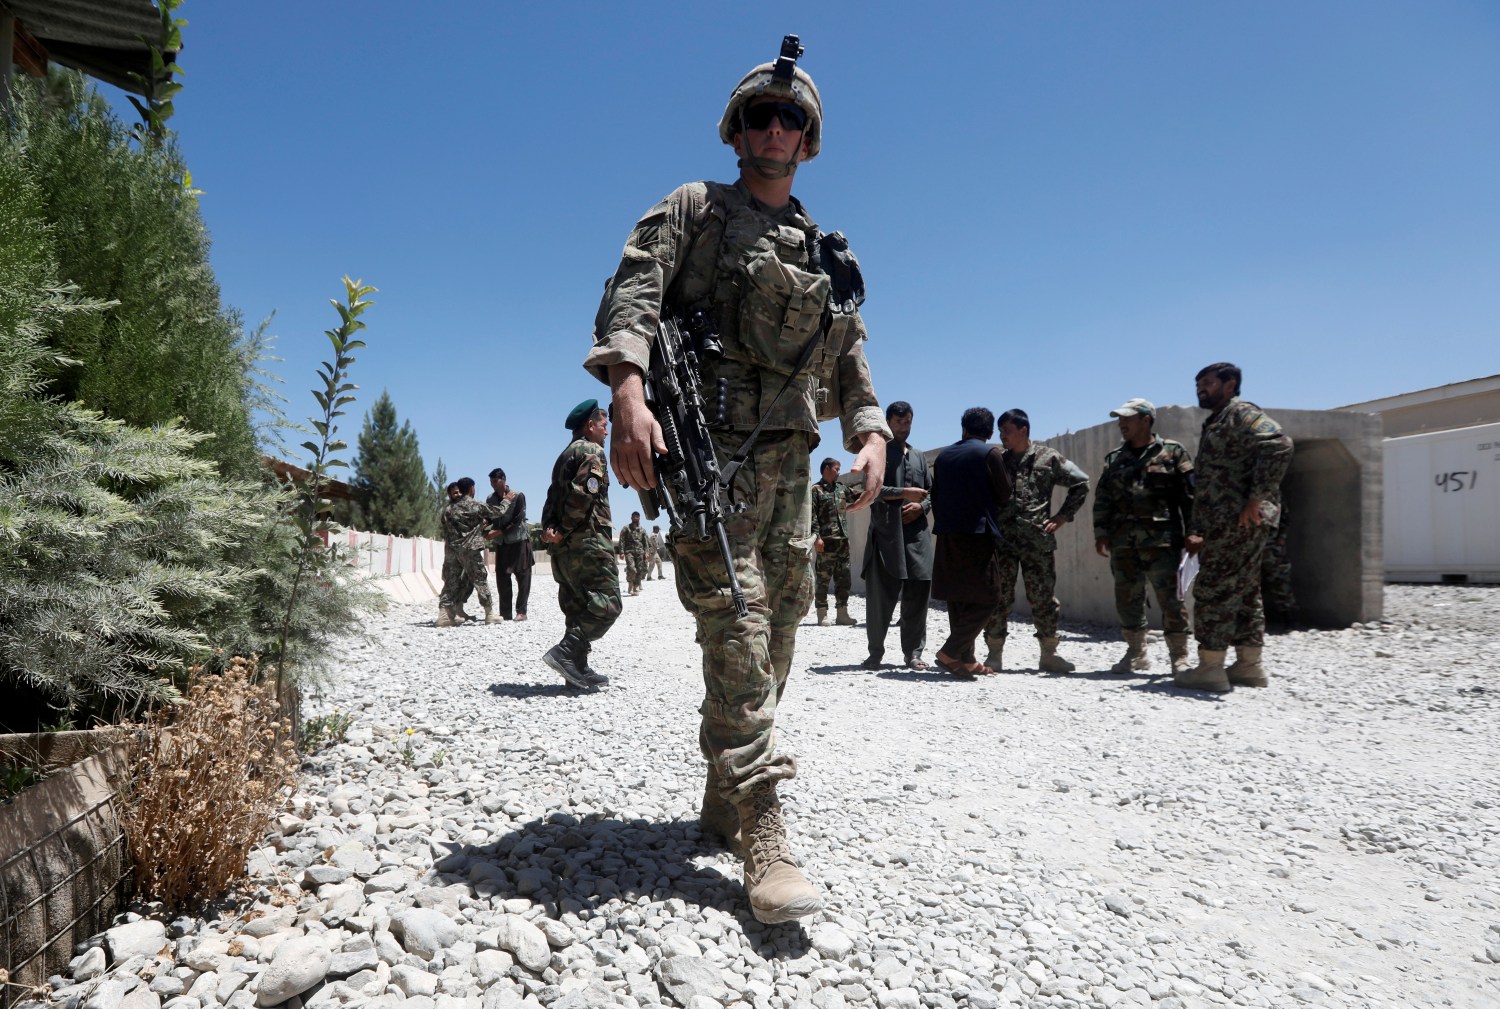 FILE PHOTO: A U.S. soldier keeps watch at an Afghan National Army base in Logar province, Afghanistan August 5, 2018. REUTERS/Omar Sobhani/File Photo